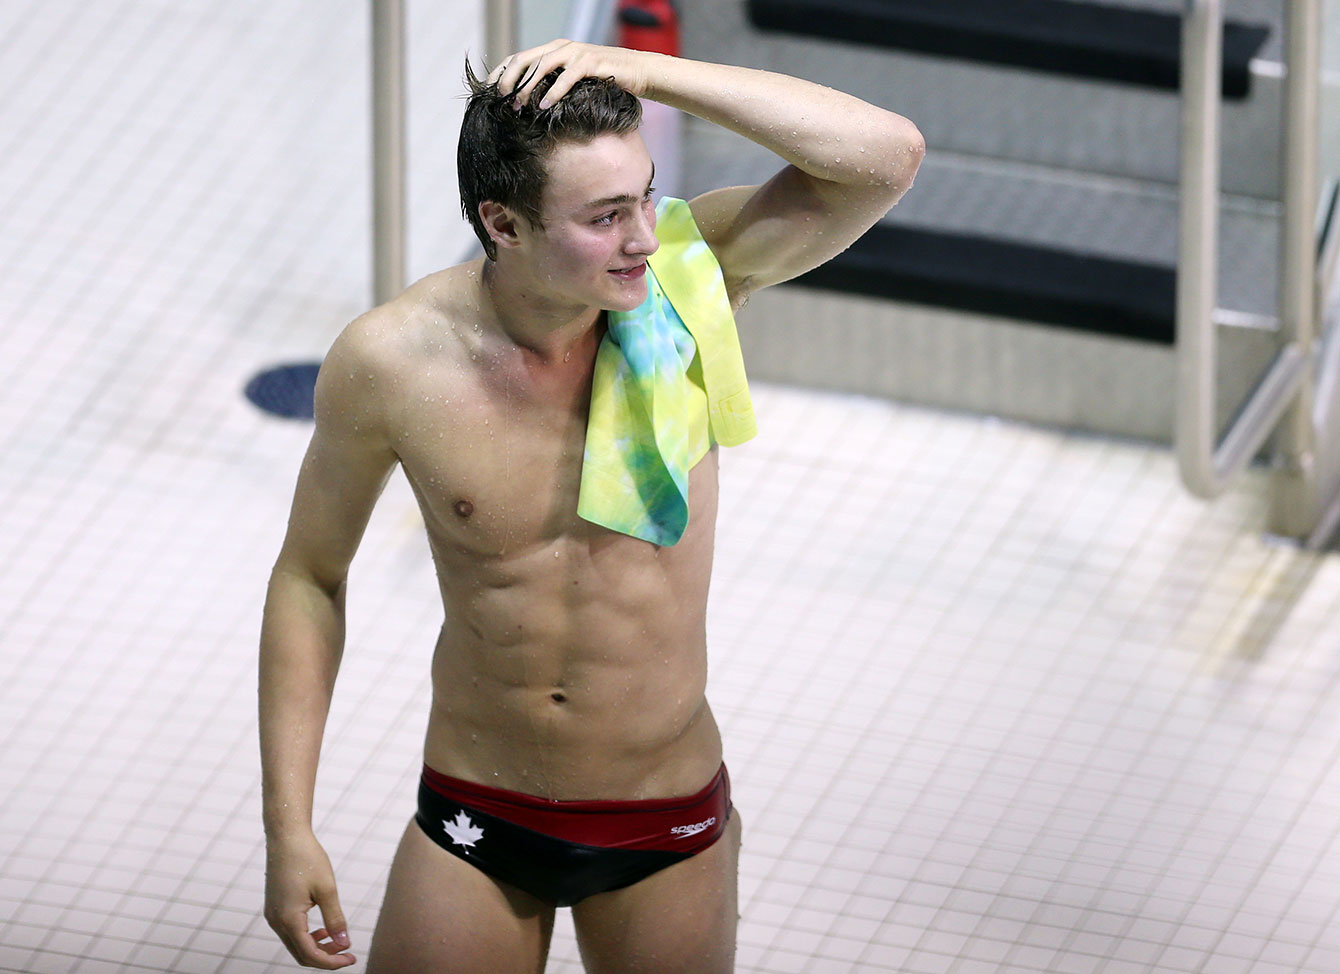 Philippe Gagné reacts to winning the bronze medal in the men's 3m springboard. 